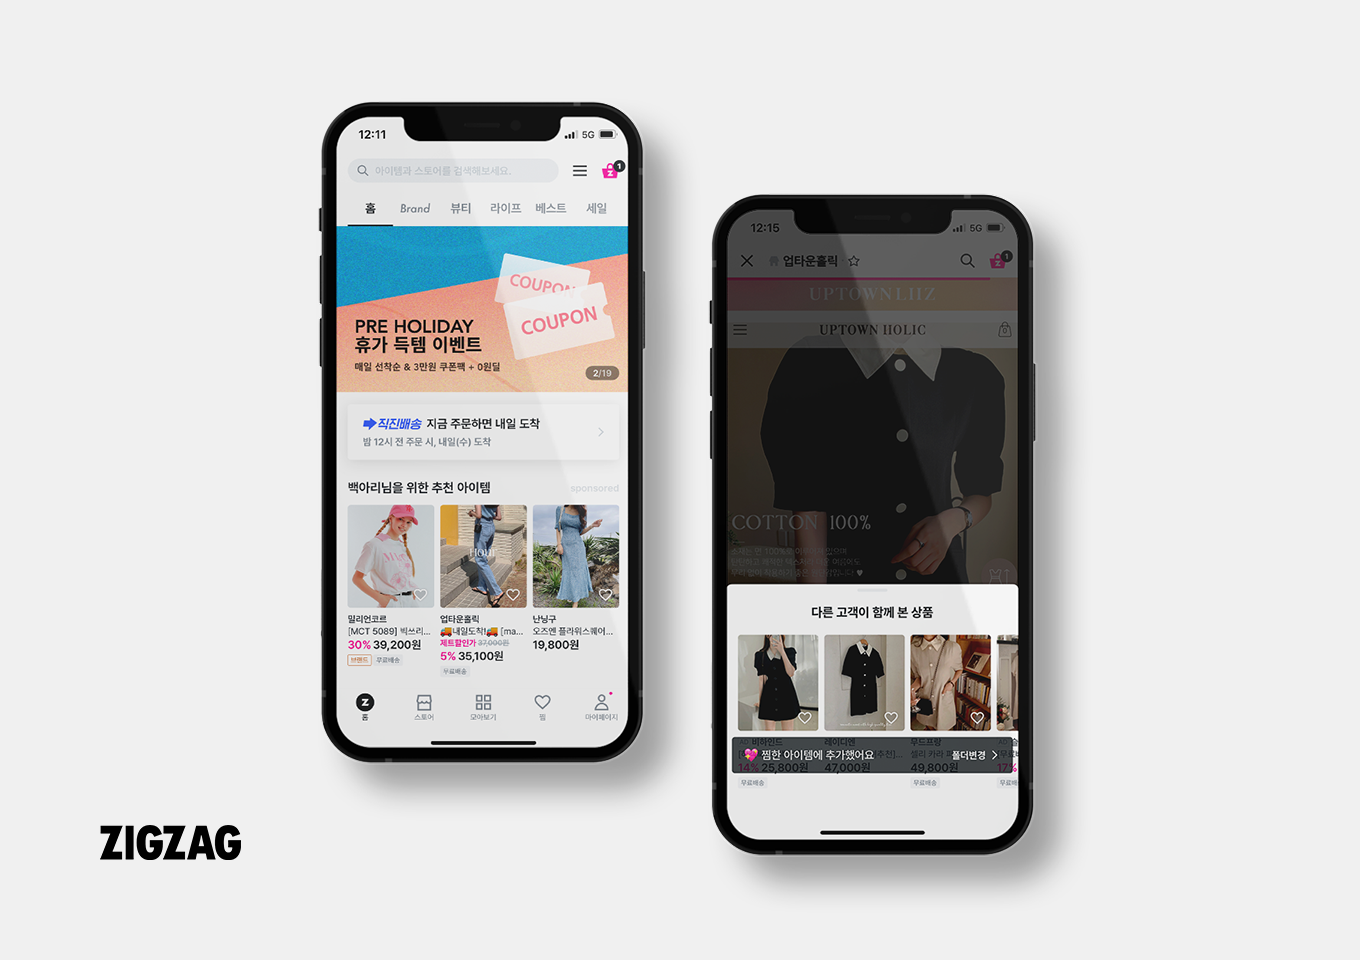 How ZigZag is serving 35 million users with image-based Visual Recommendations